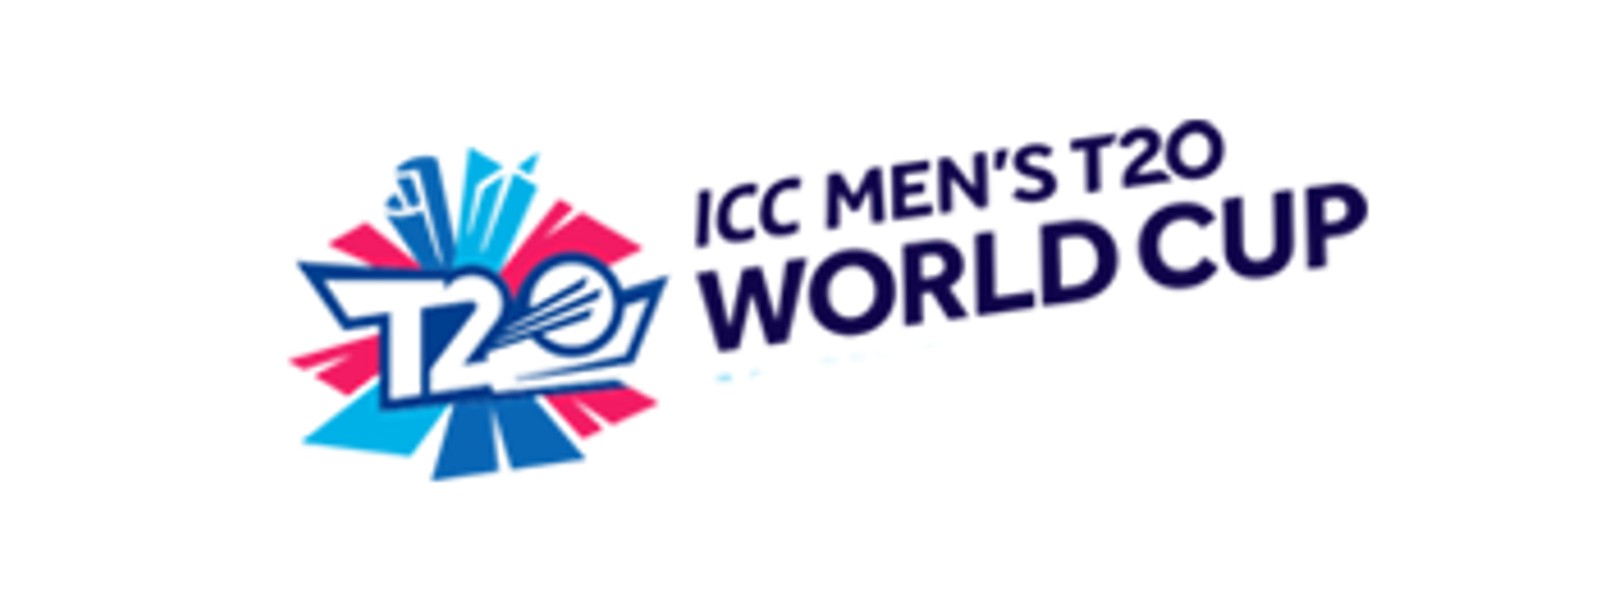 SLC names squad for T20 World Cup